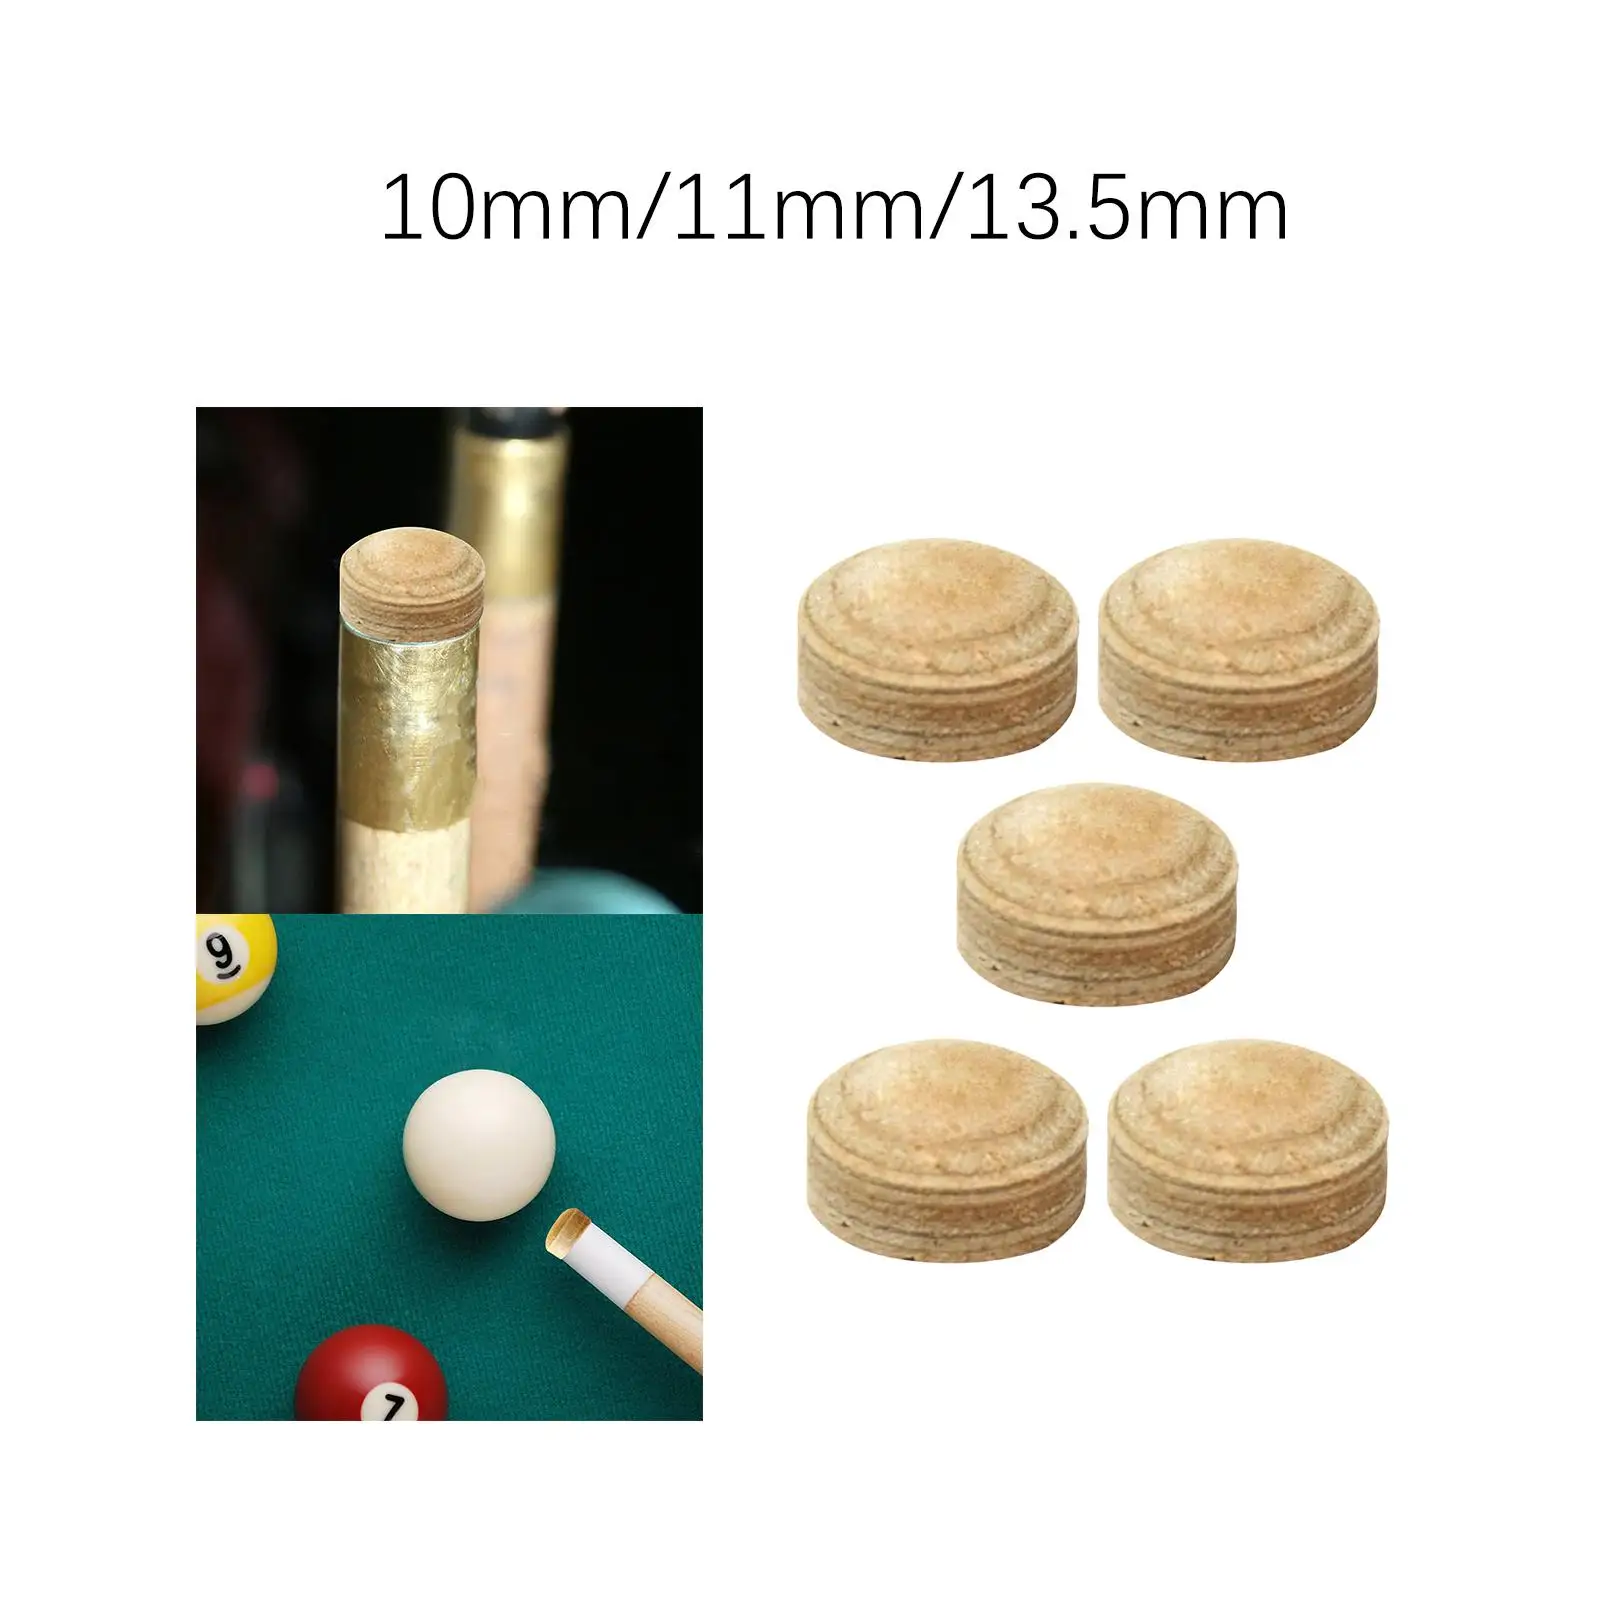 5Pcs Table Billiards Pool Cue Tips Billiard Game Artificial Leather Pool Cue Tips Repair Kit for Personal Use Billiards Room